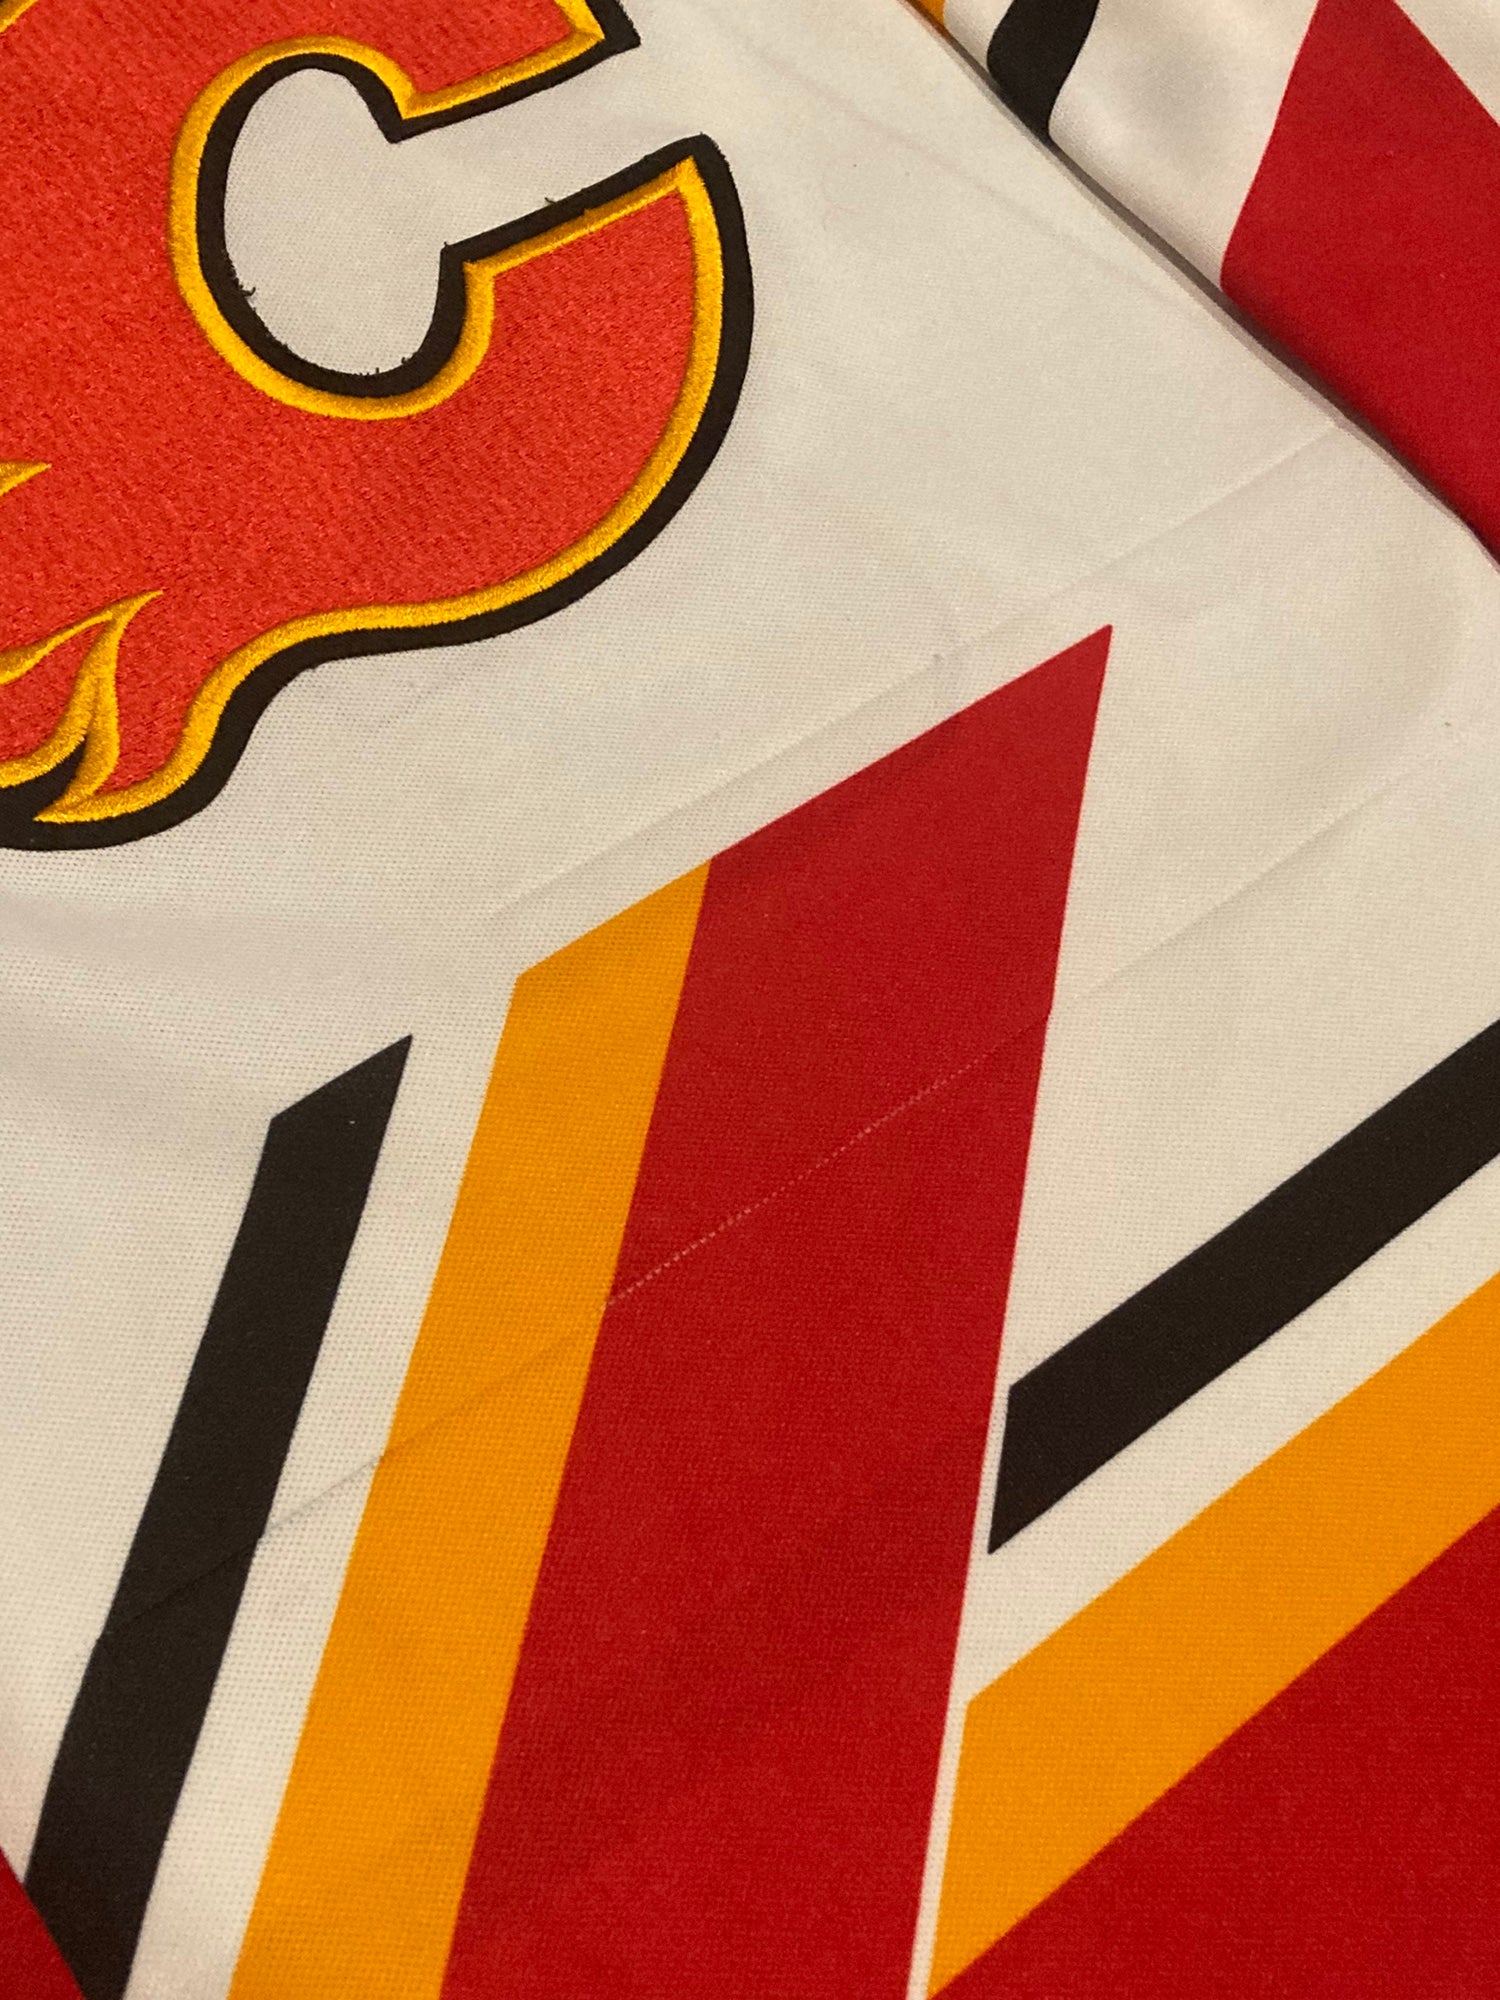 Authentic Calgary Flames Jersey 48 Large CCM Pedestal New